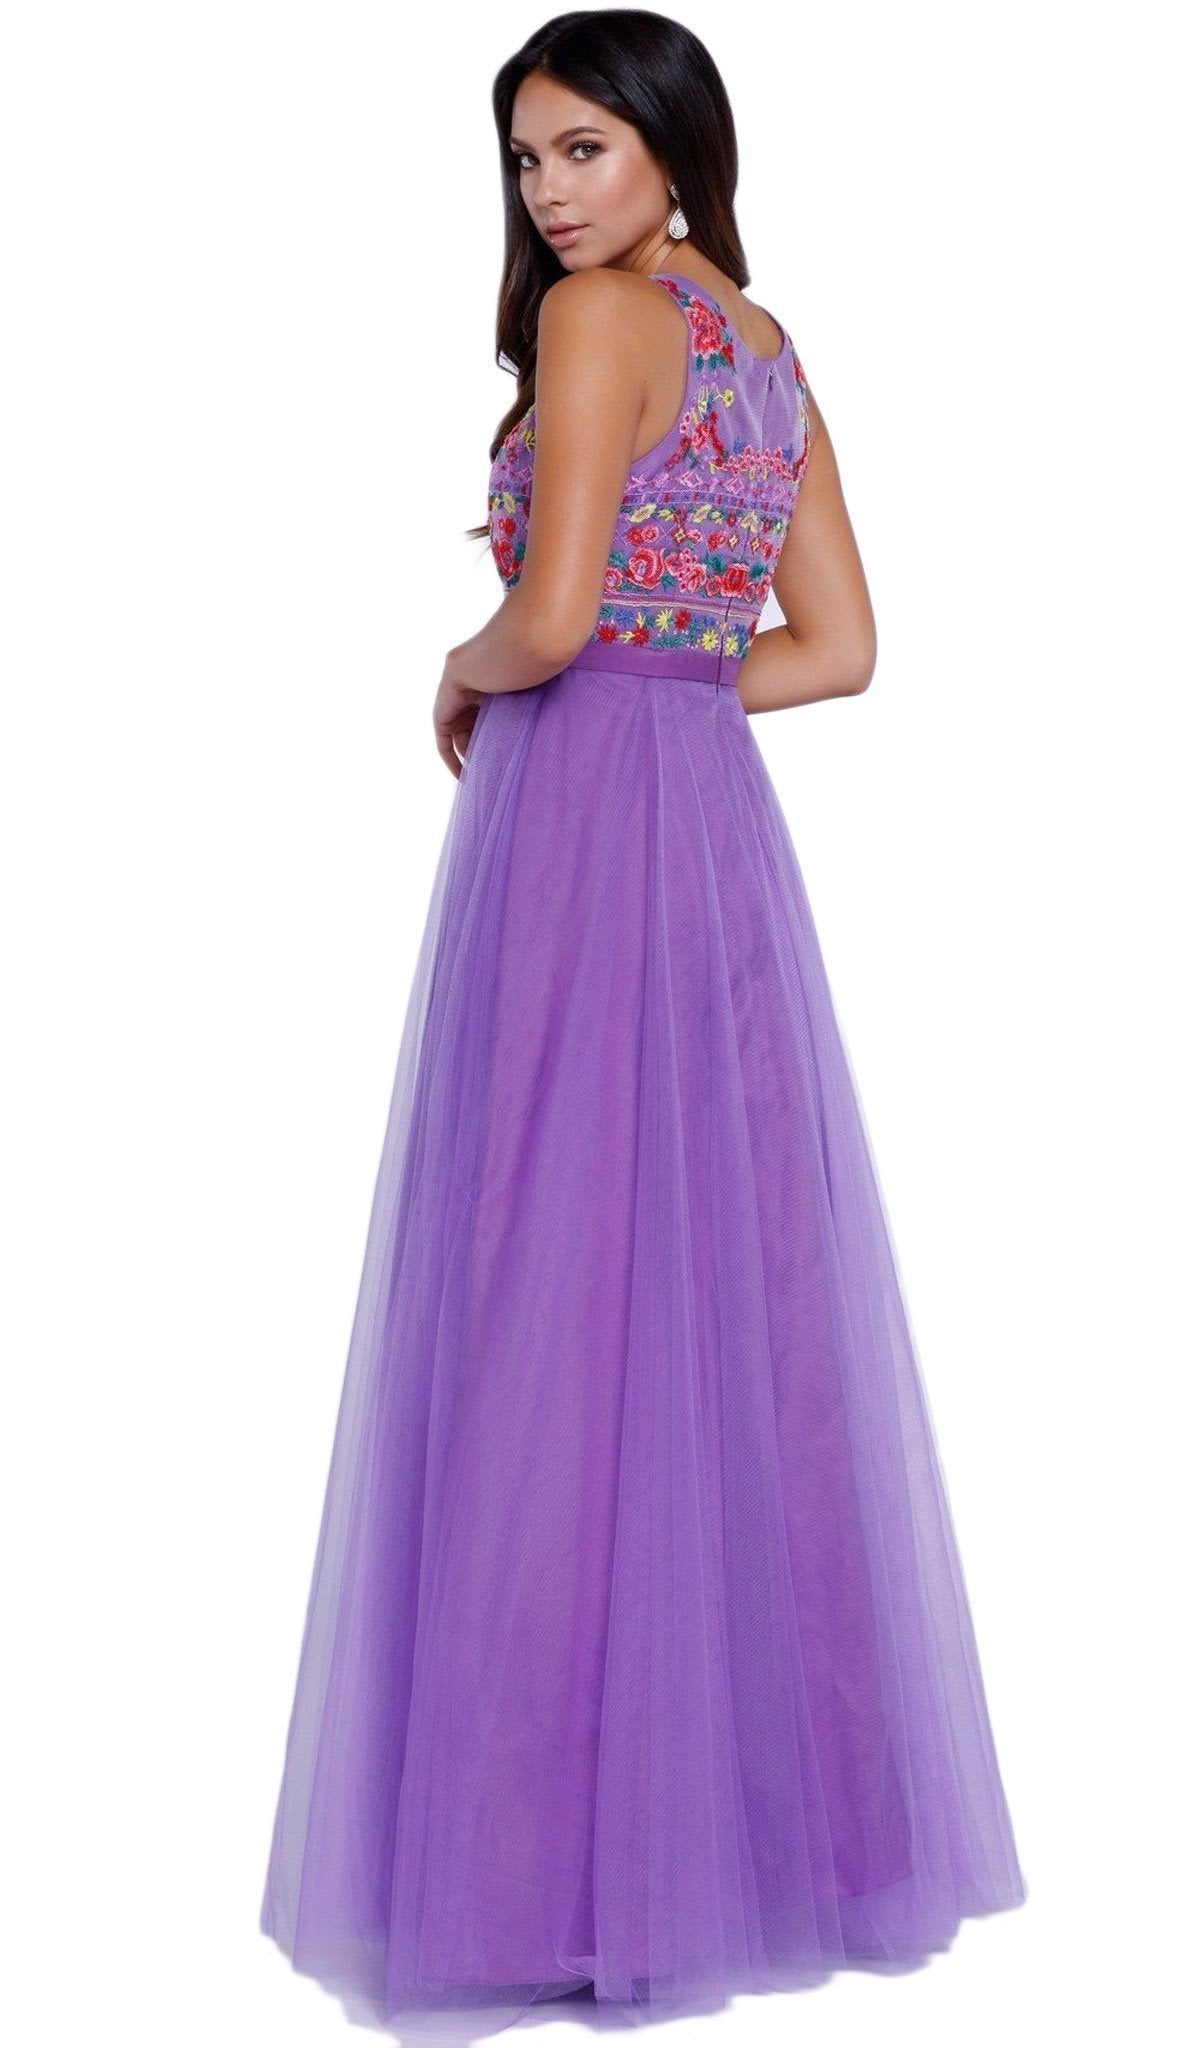 Nox Anabel - 8263 Floral Embroidered Bateau Chiffon Evening Dress Special Occasion Dress